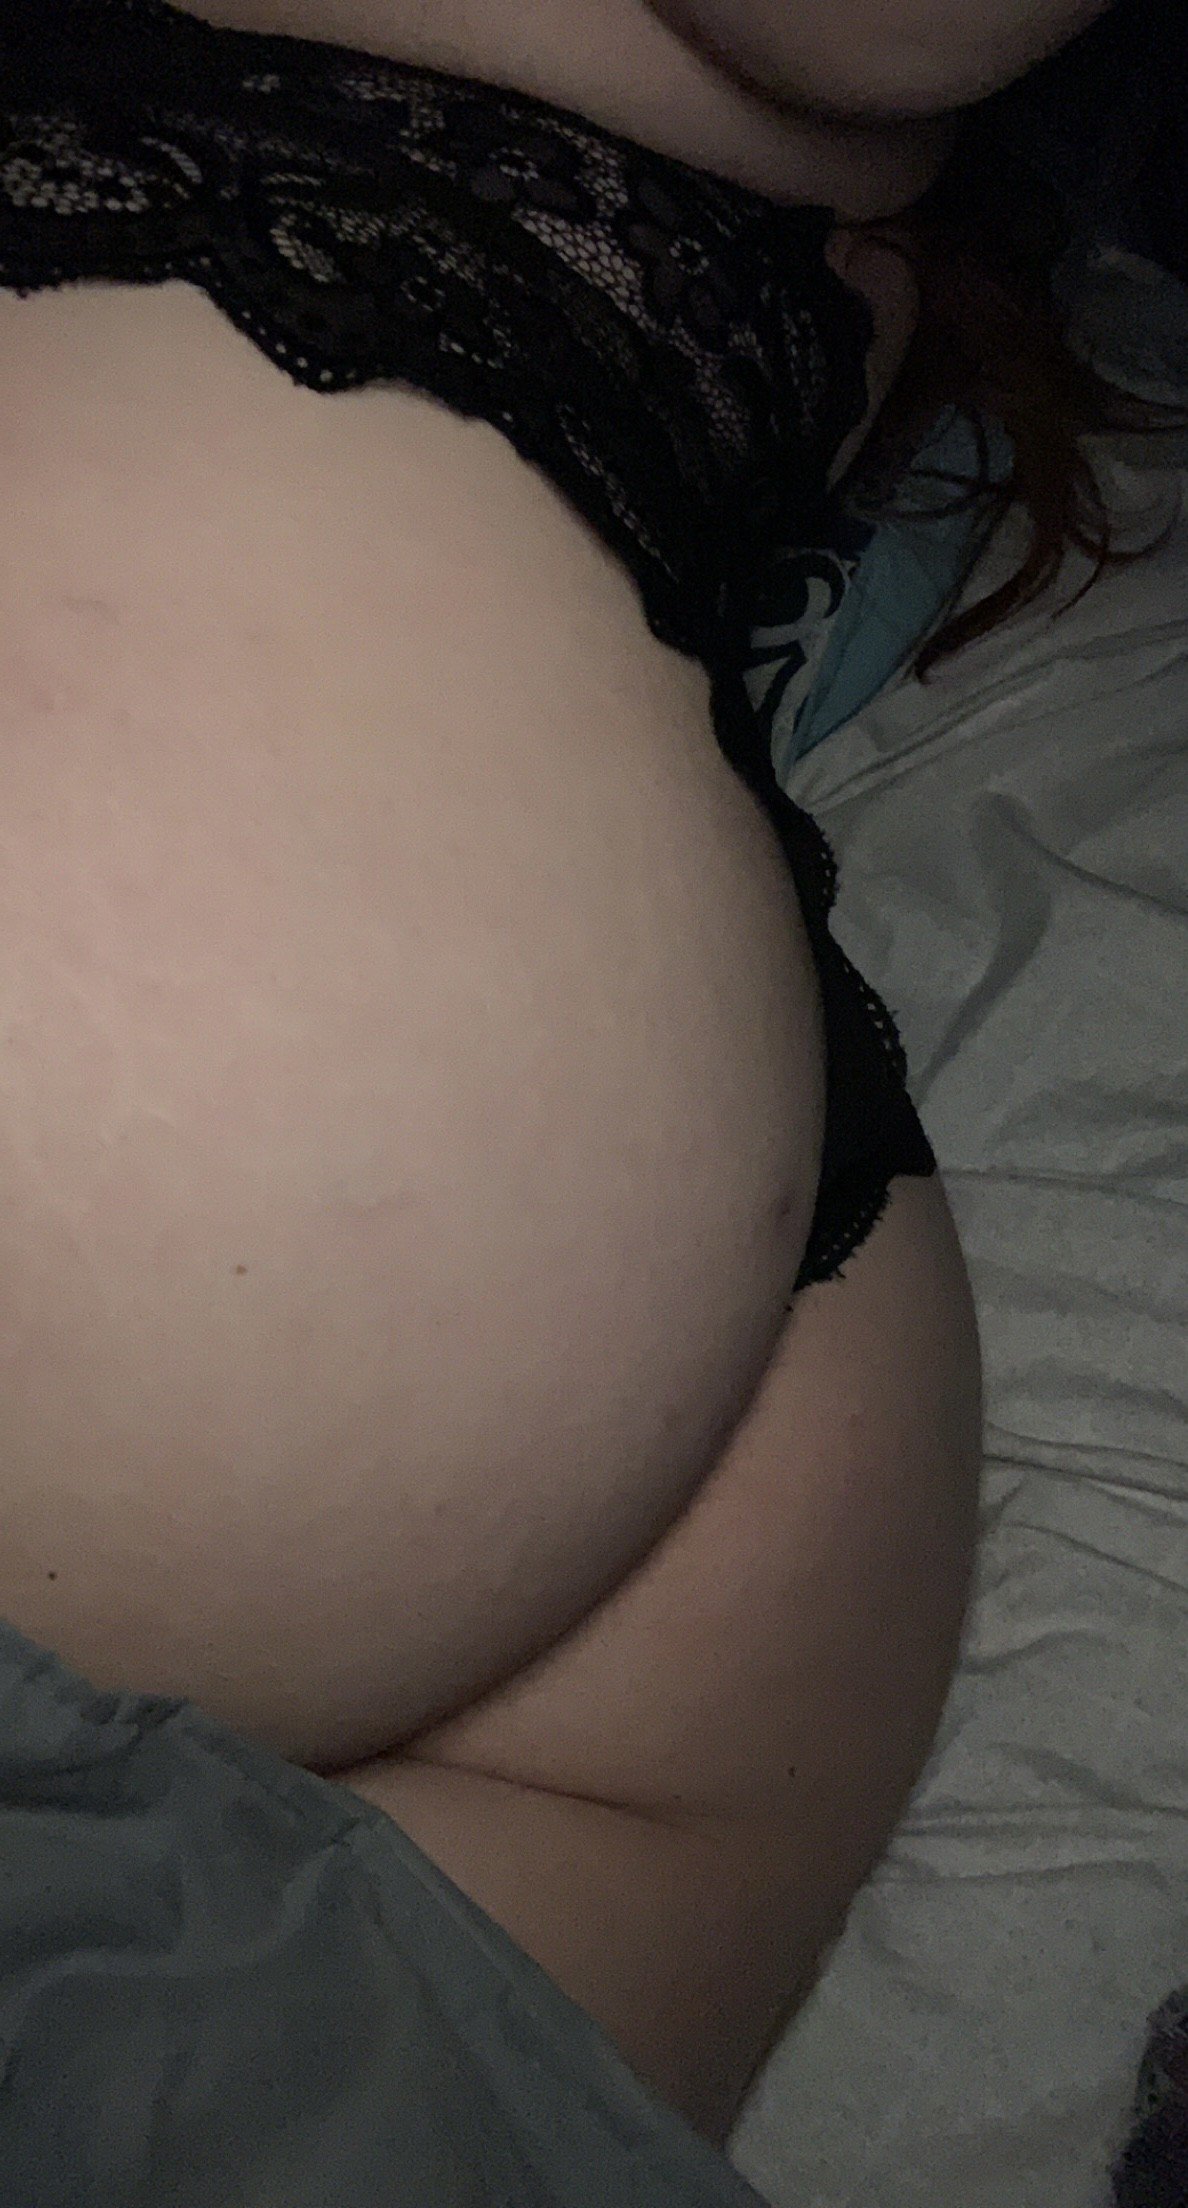 Watch the Photo by Kait2138 with the username @Kait2138, who is a star user, posted on January 13, 2021. The post is about the topic OnlyFans. and the text says 'No pay walls!!! onlyfans.com/thicckait

#onlyfans #onlyfansbbw #of #onlyfanspromo #onlyfanspromotion #sellingcontent #bbw #chubby #kinky'